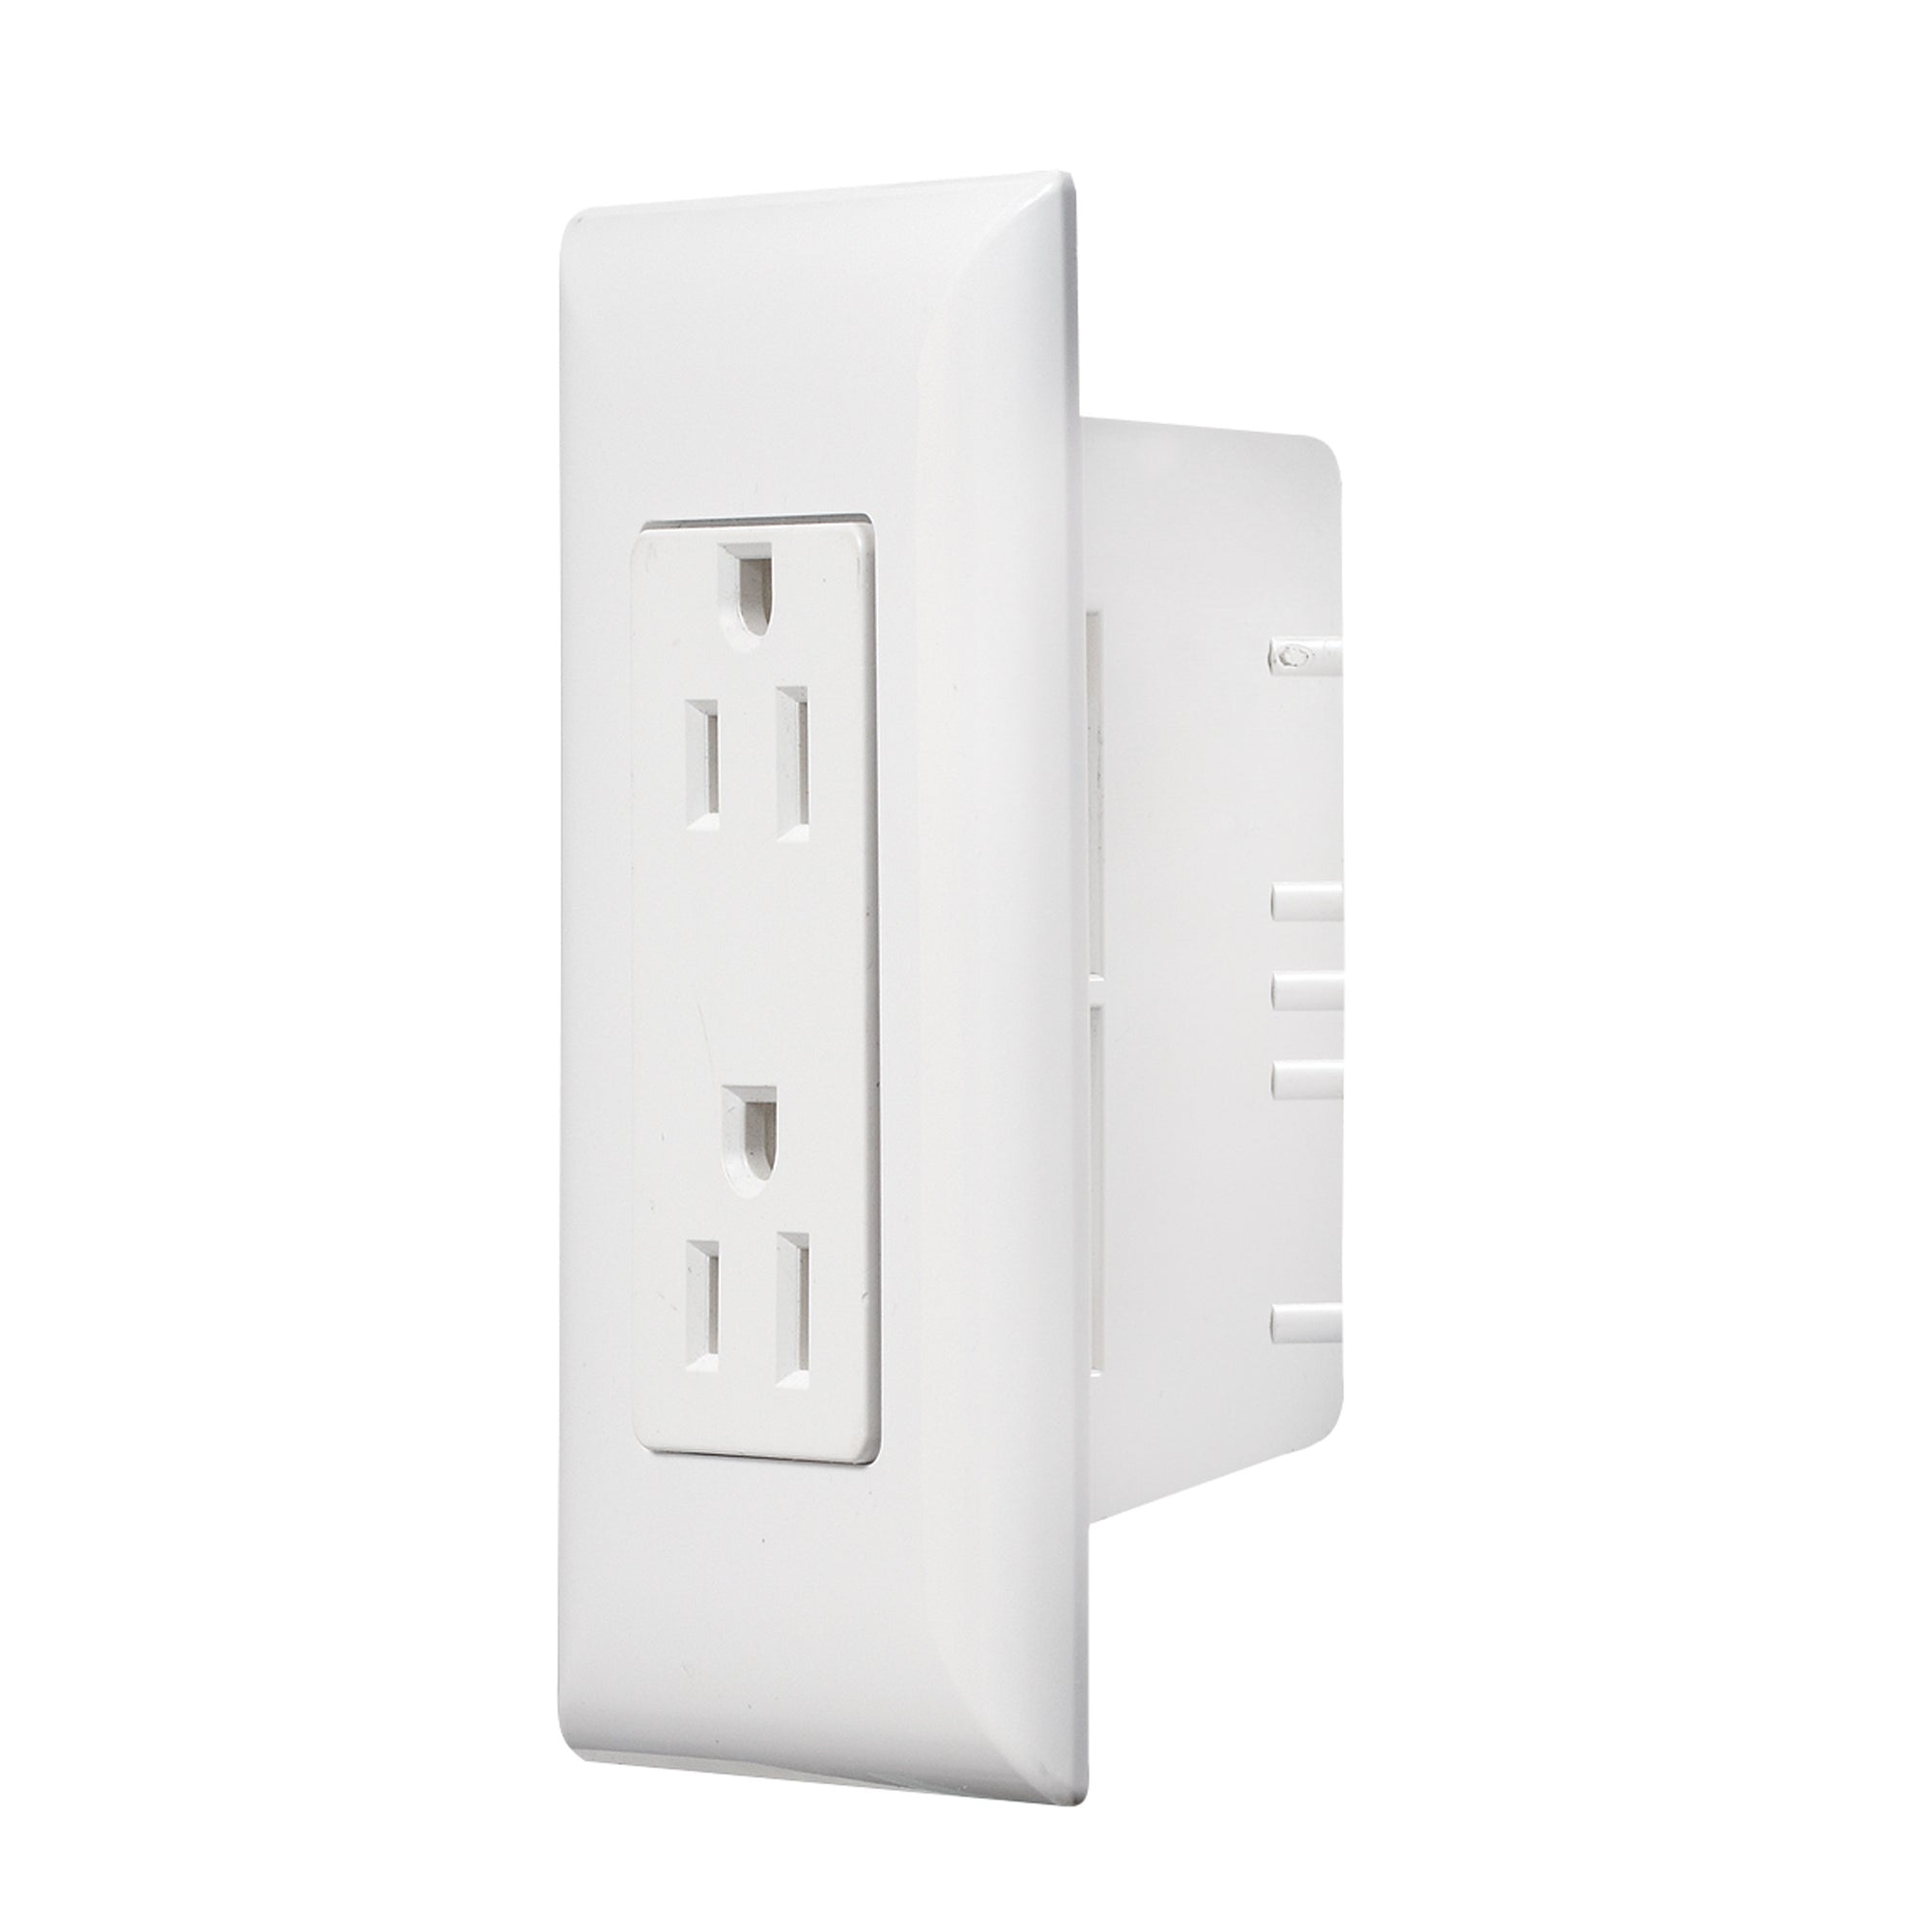 RV Designer S831 AC Contemporary Dual Outlet Speedwire With Cover Plate